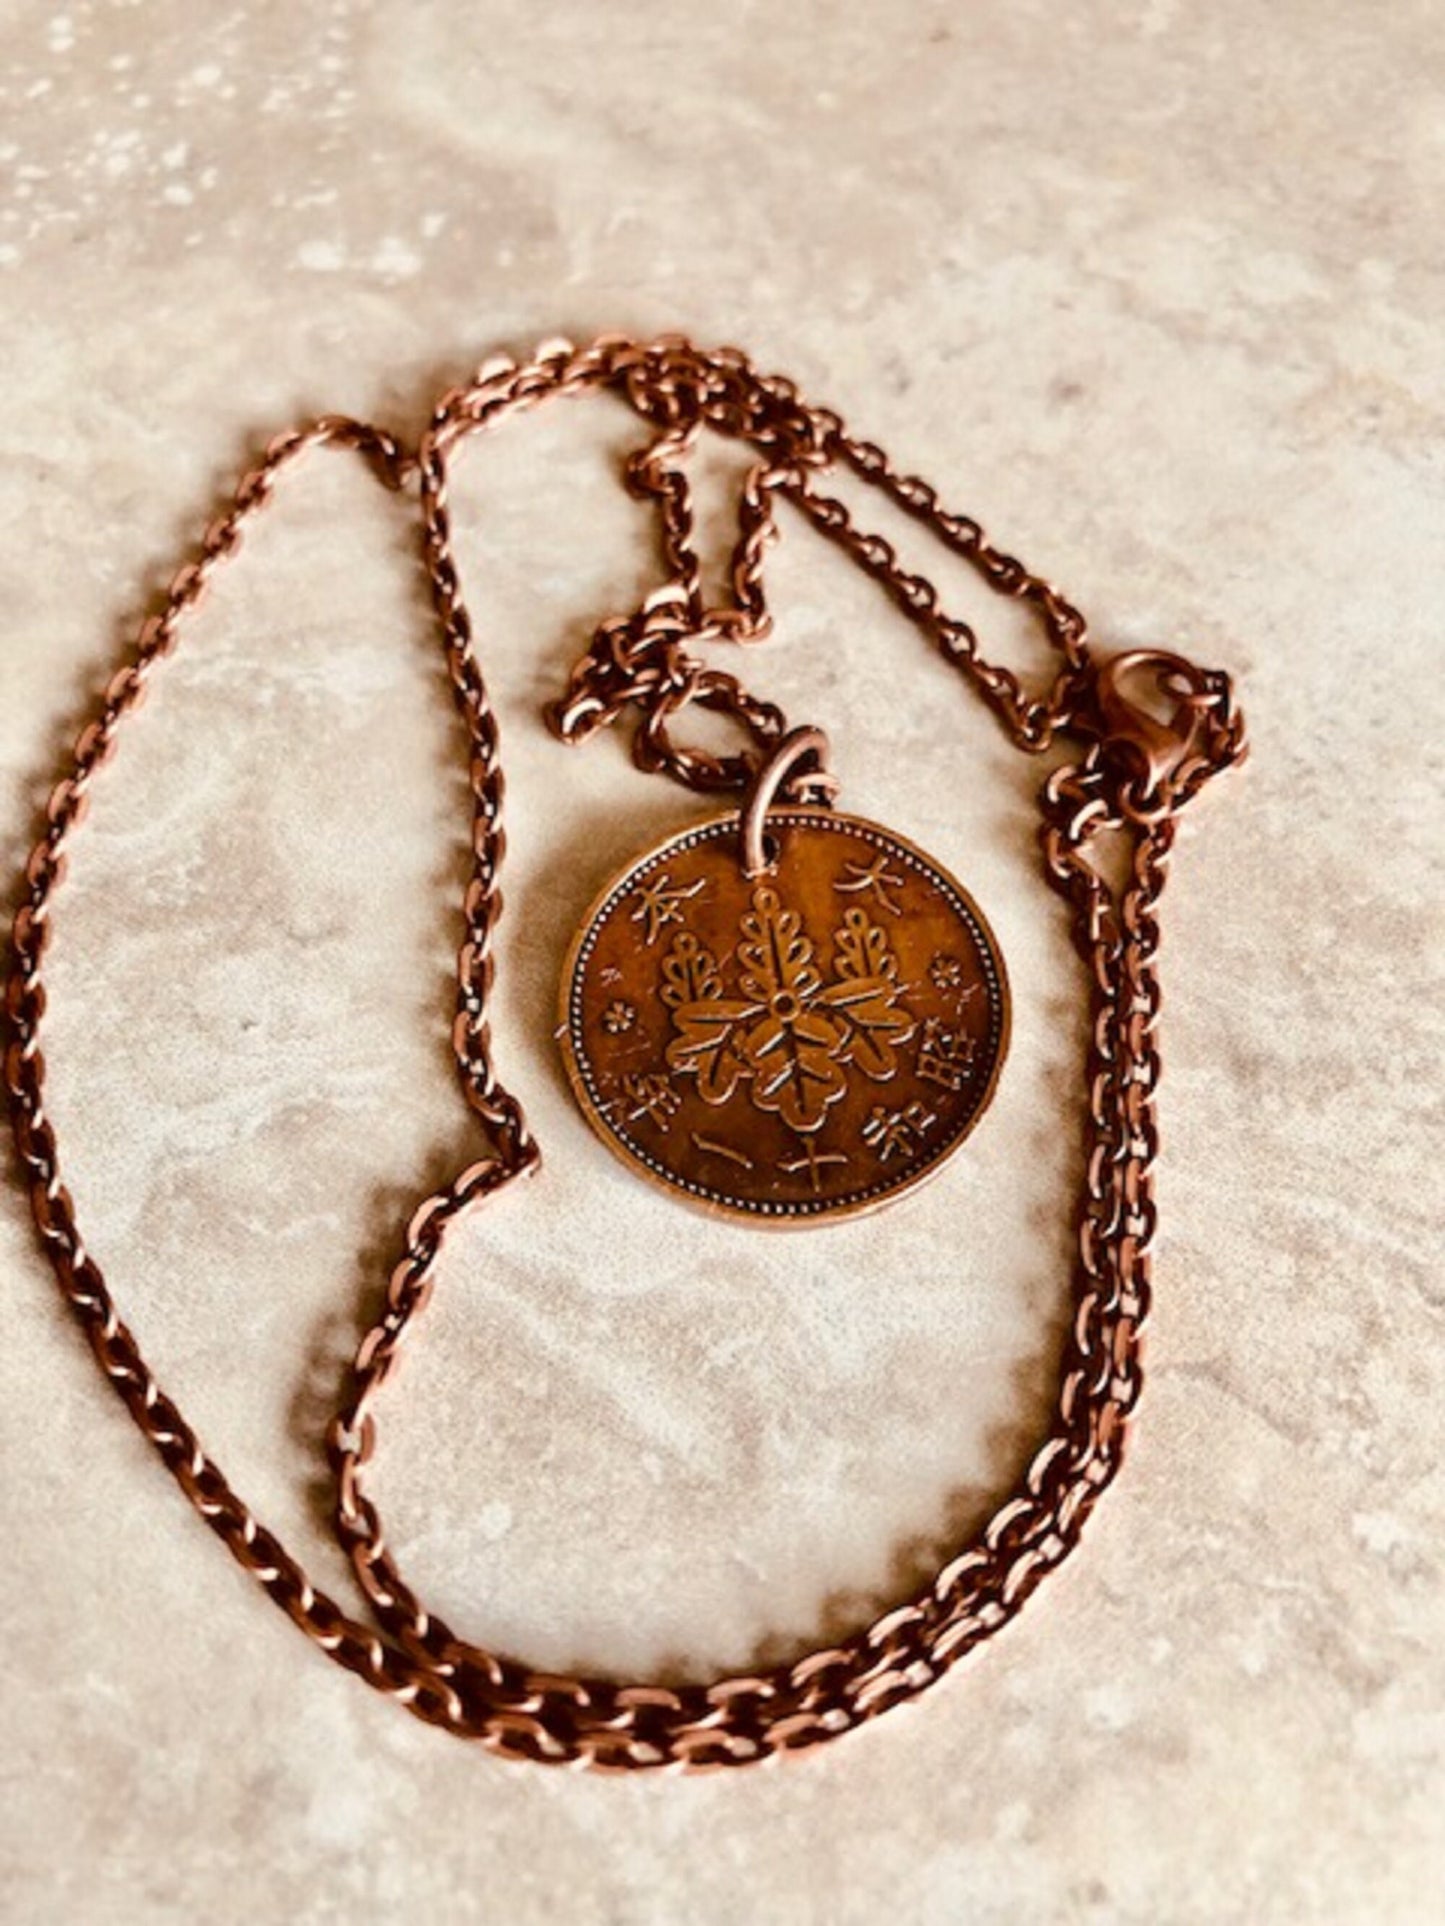 Japan Coin Pendant Necklace Vintage Japanese Yen Custom Made Vintage and Rare coins - Coin Enthusiast - Fashion Accessory